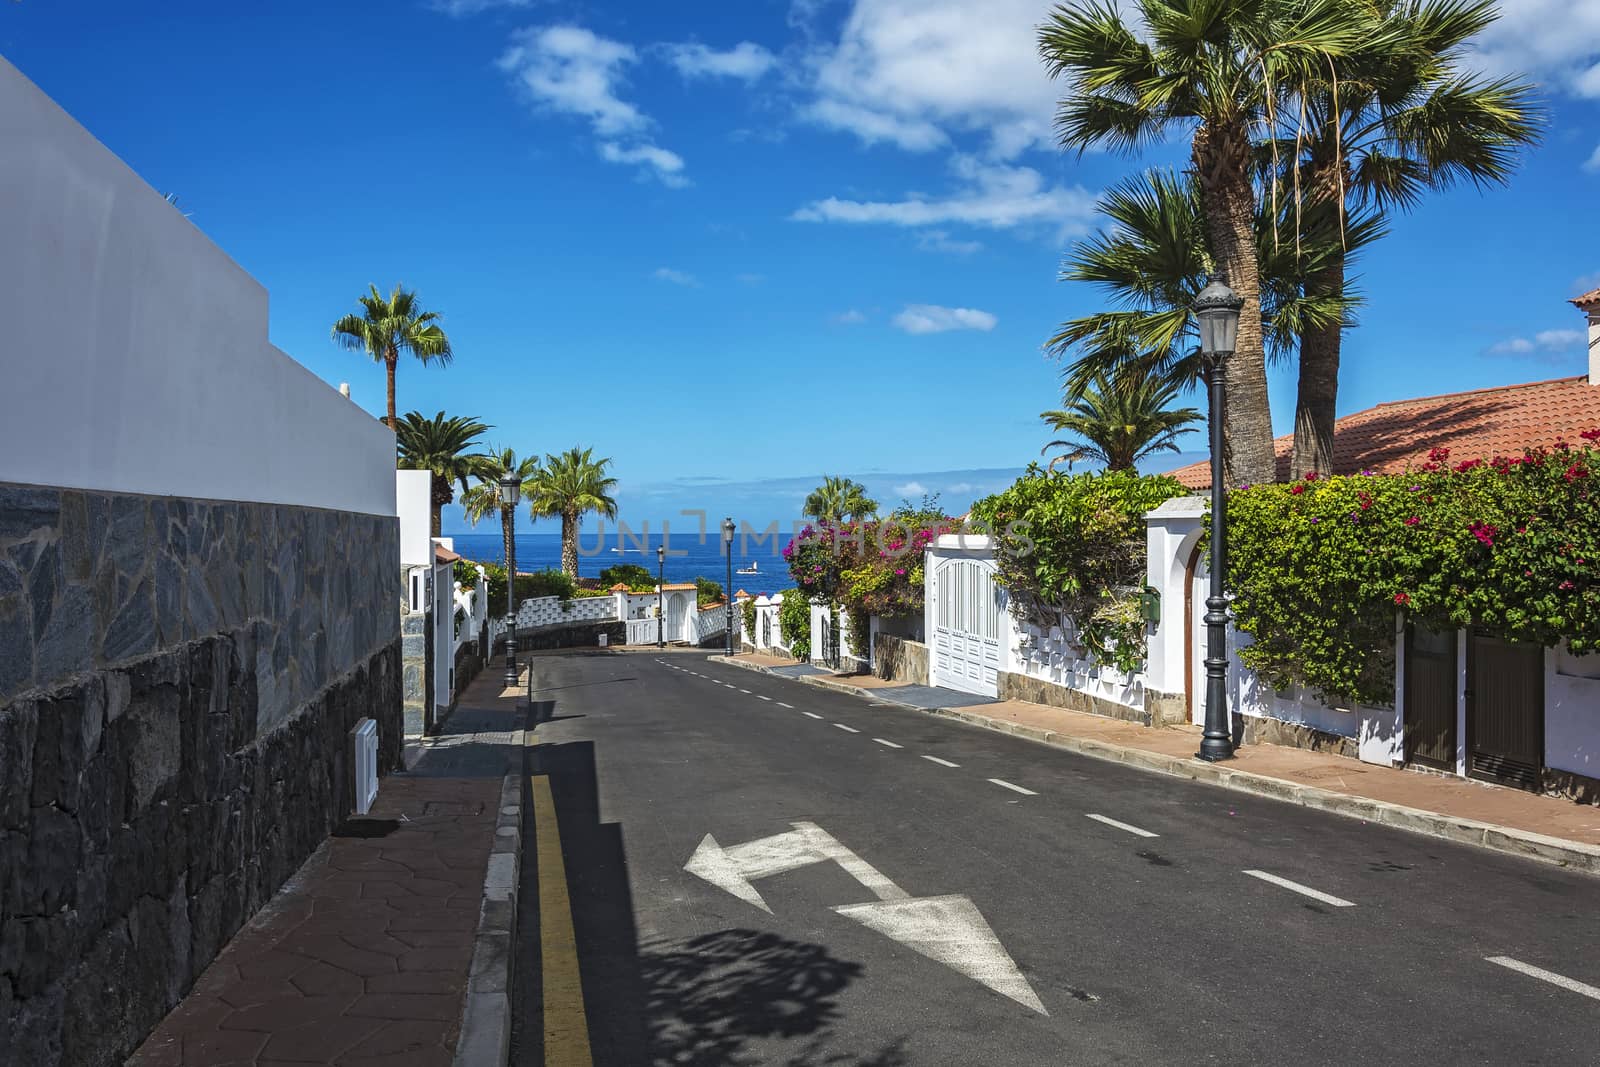 Scenic cityscape with a view of the ocean (Los Canary Islands, T by Grommik